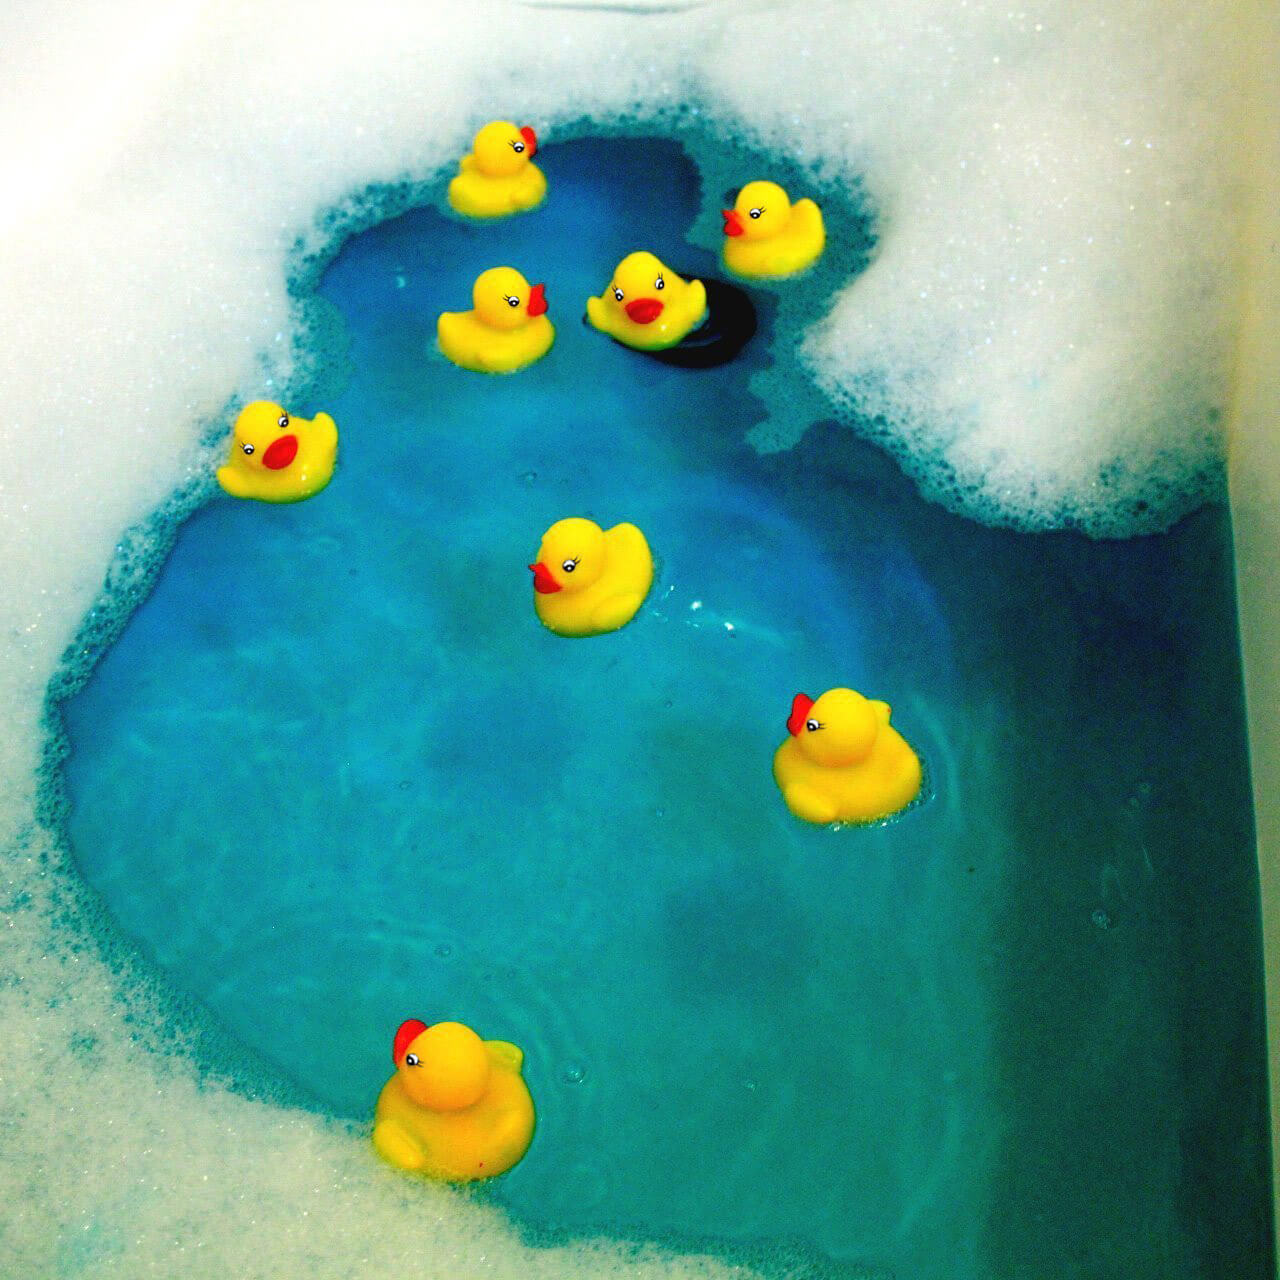 Rubber Duck Ducky Baby Bath Toy for Kids Float & Squeak Novelty Place? by Novelty Place 12 Pcs 